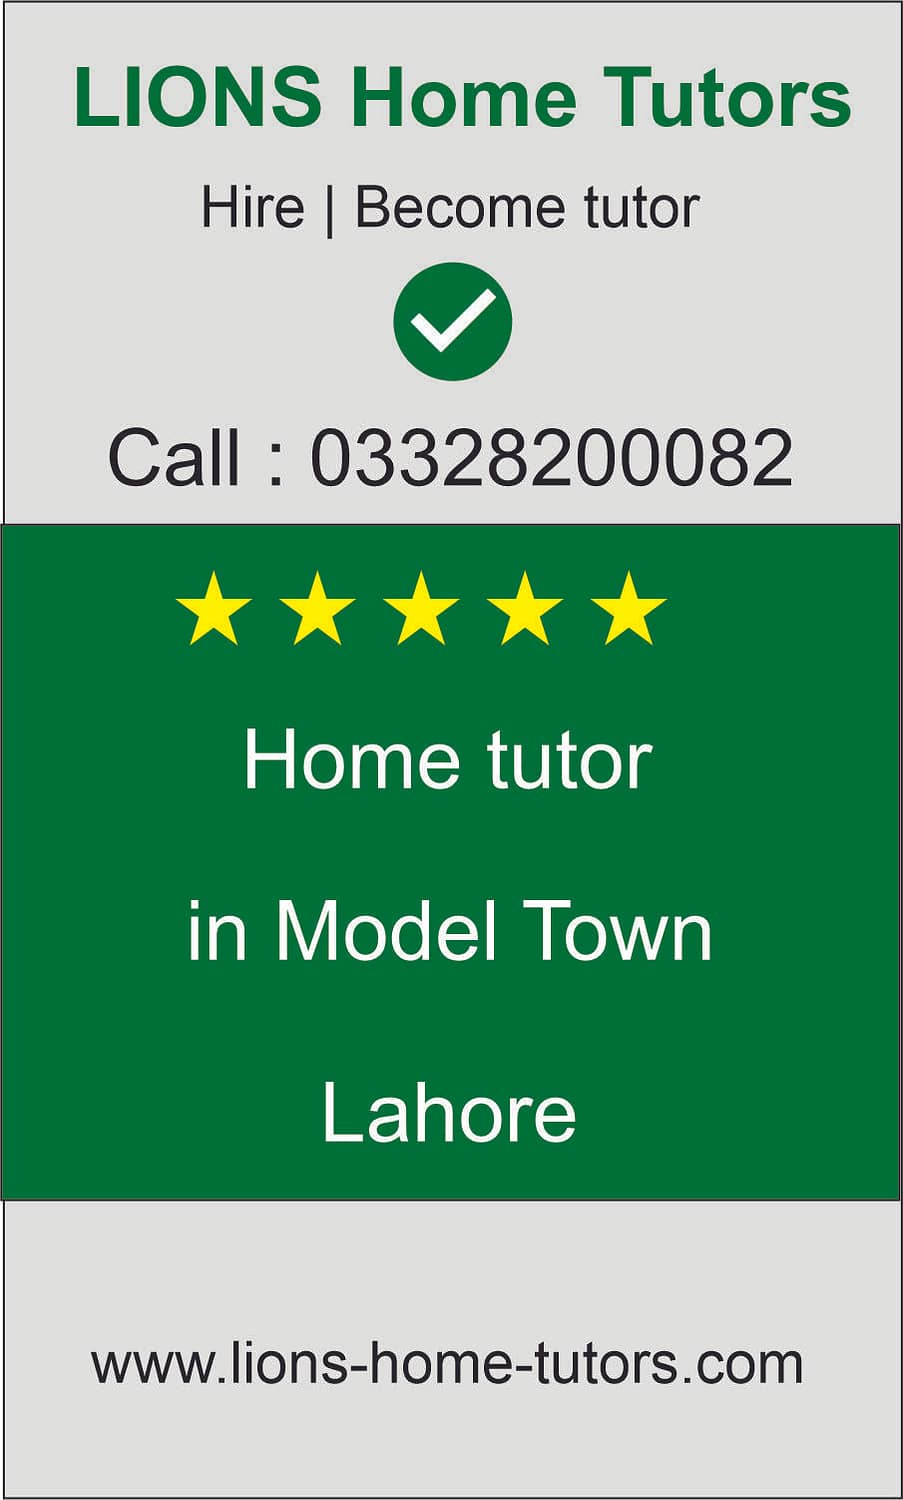 Home tutor in Model Town Lahore